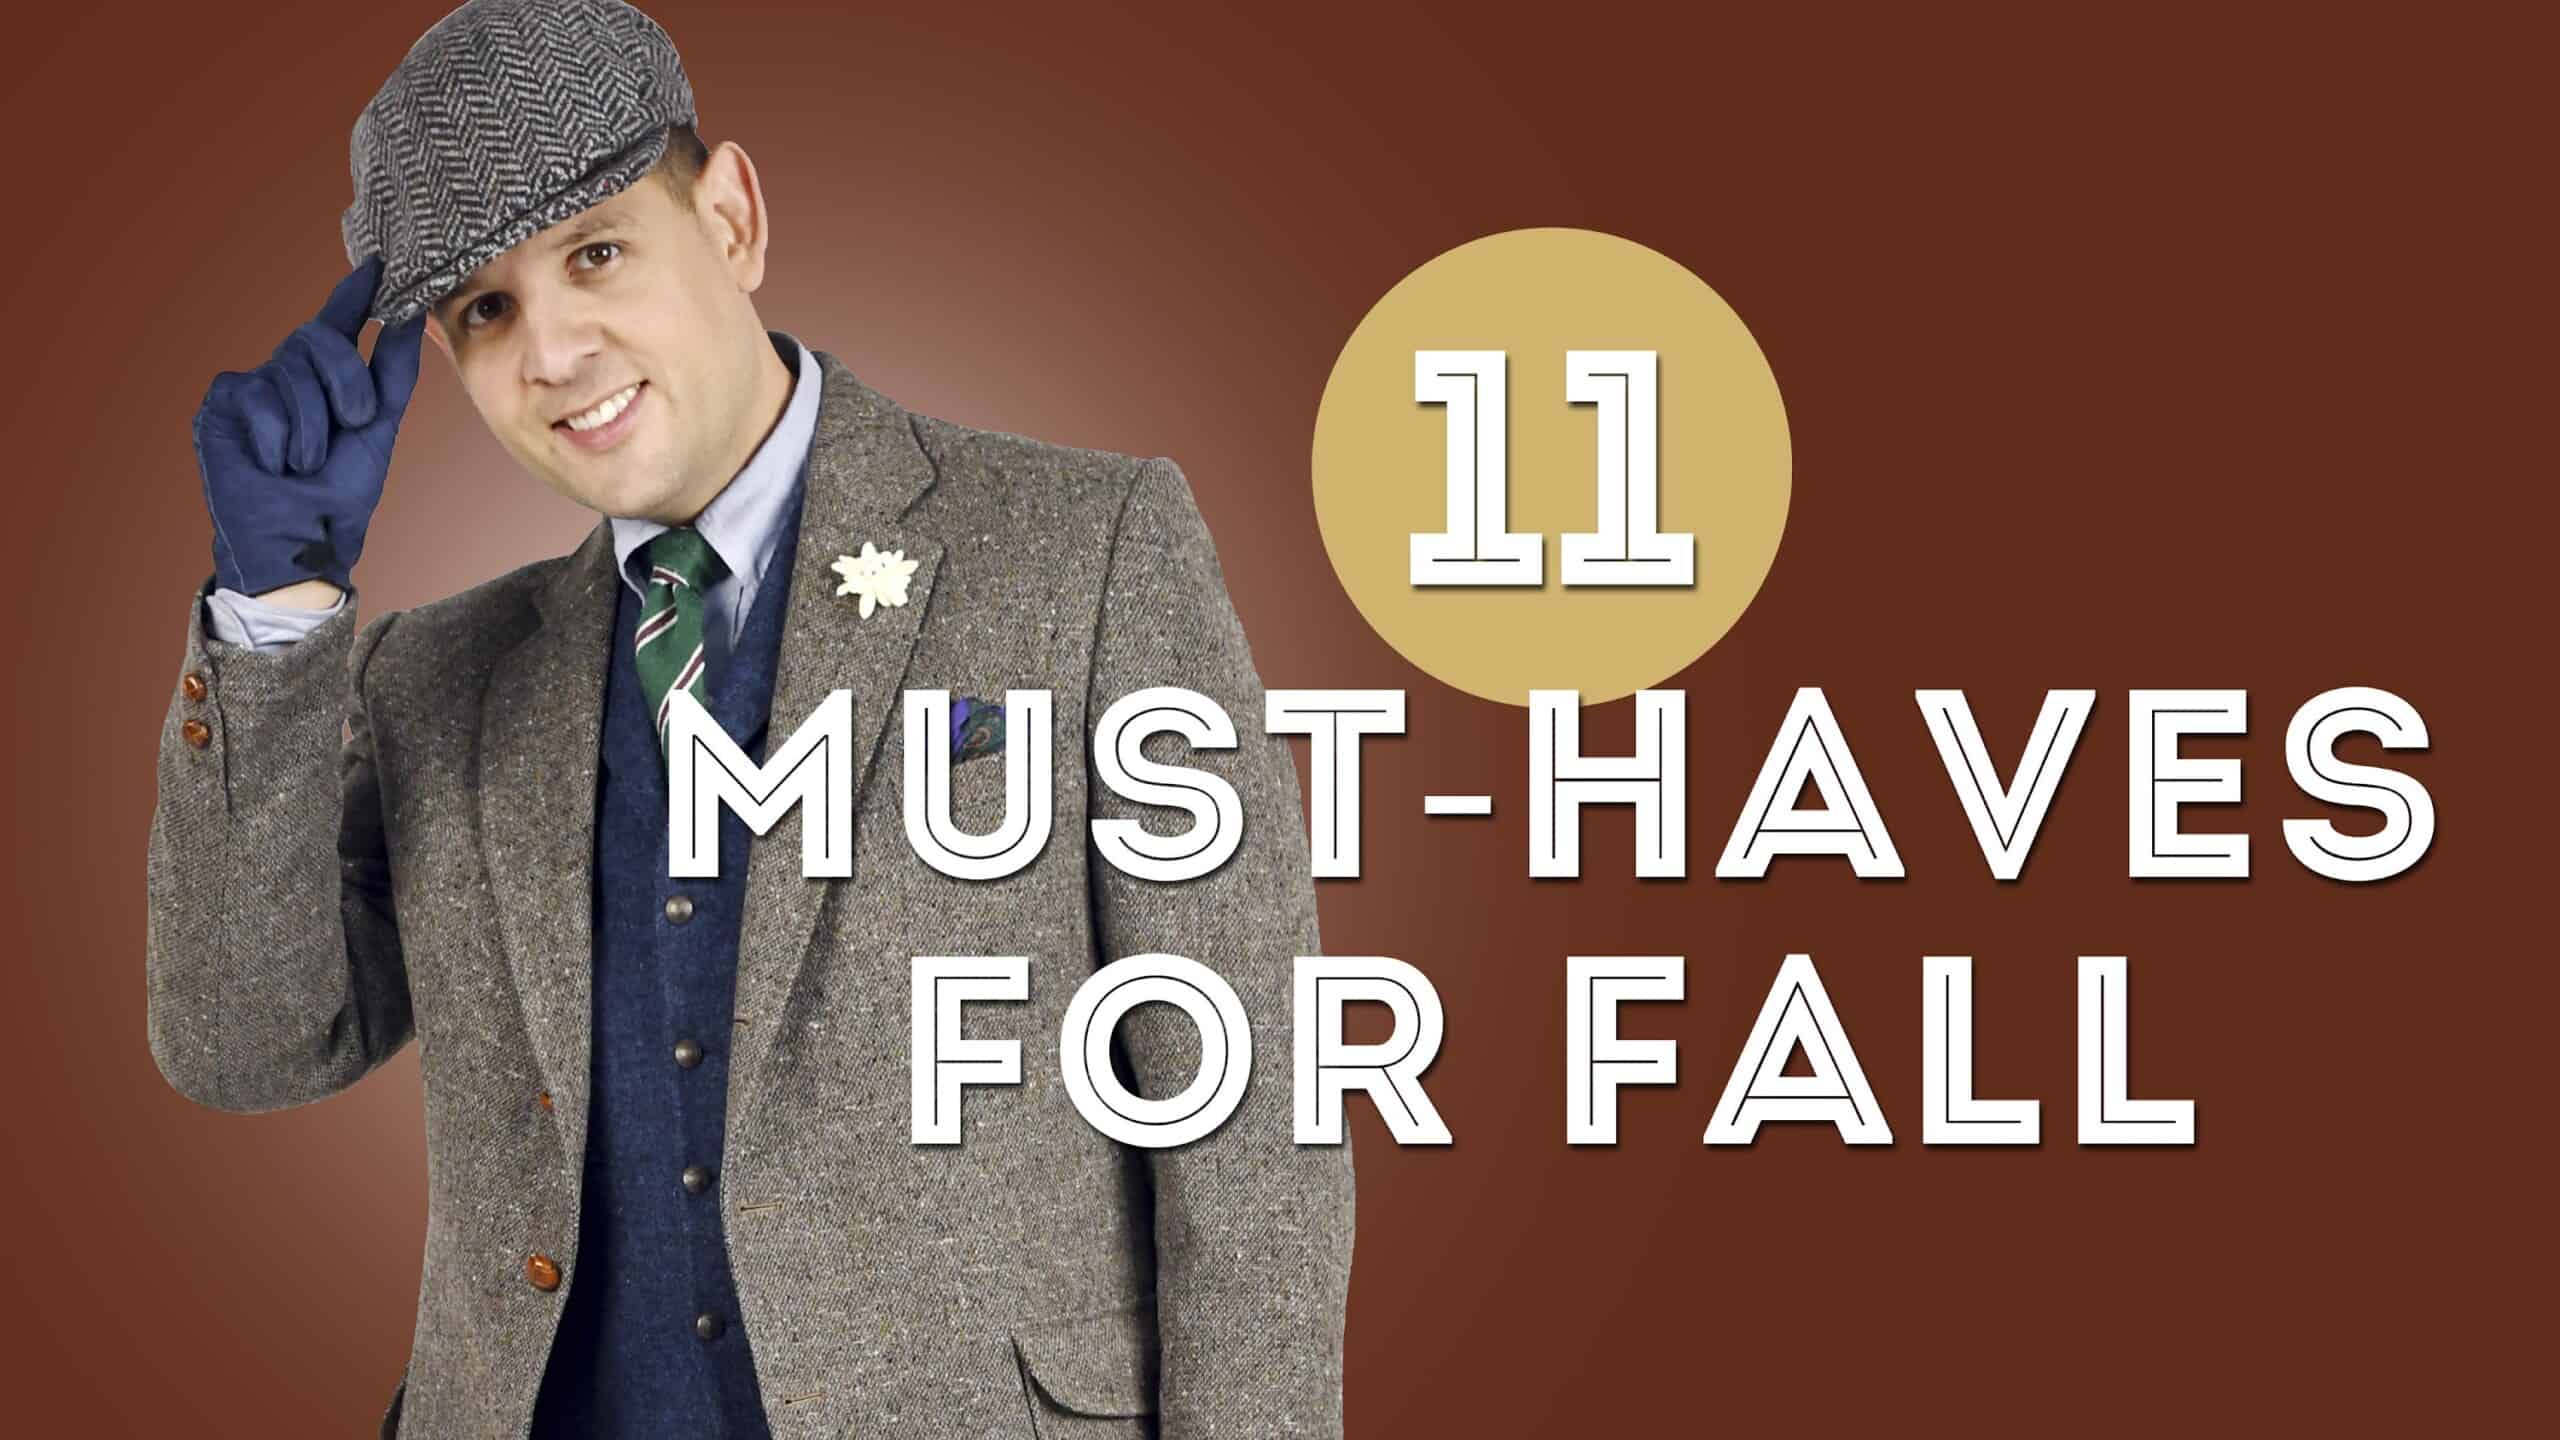 11 must haves for fall 3840x2160 scaled